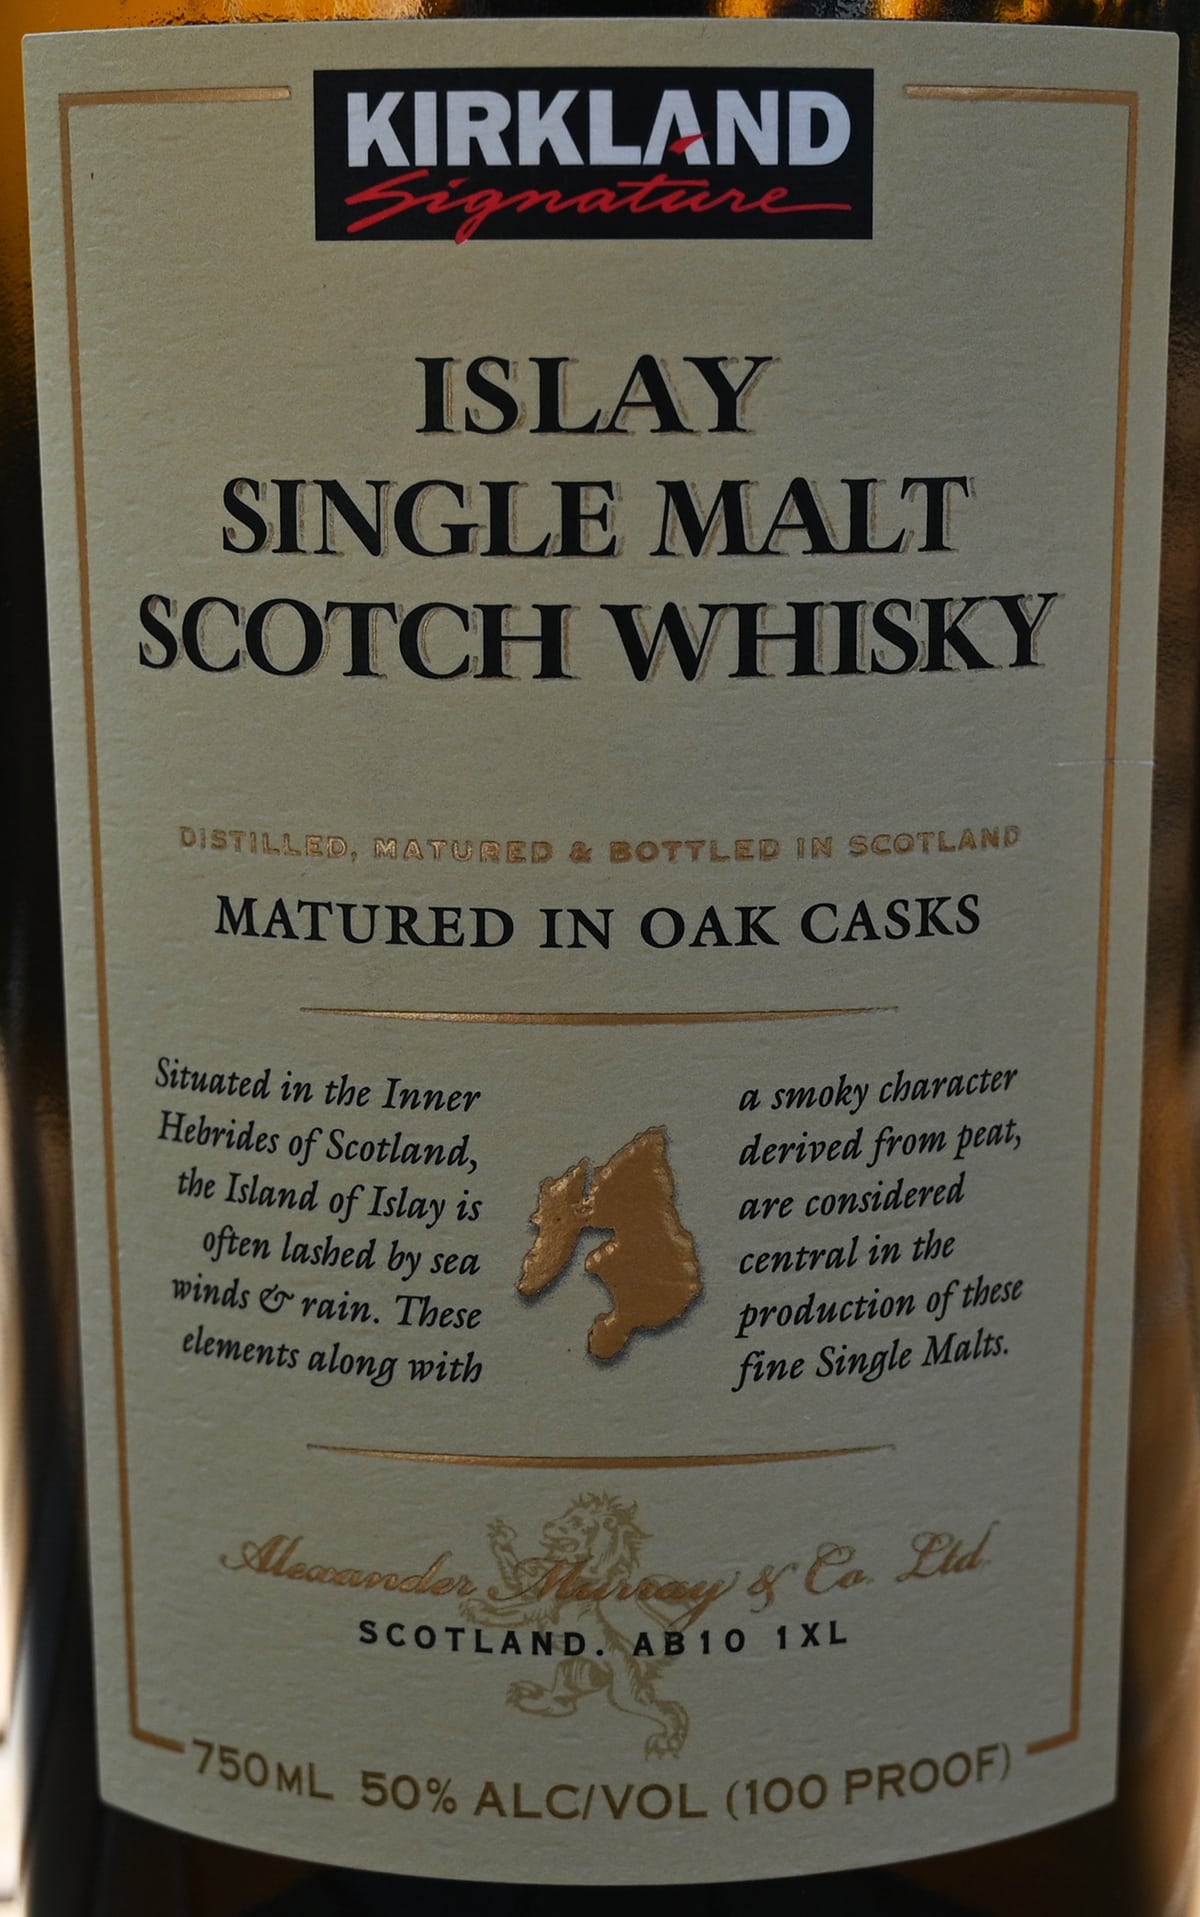 Closeup image of the front label on the Islay Scotch Whisky from Costco showing where it's made and that it is matured in oak casks.